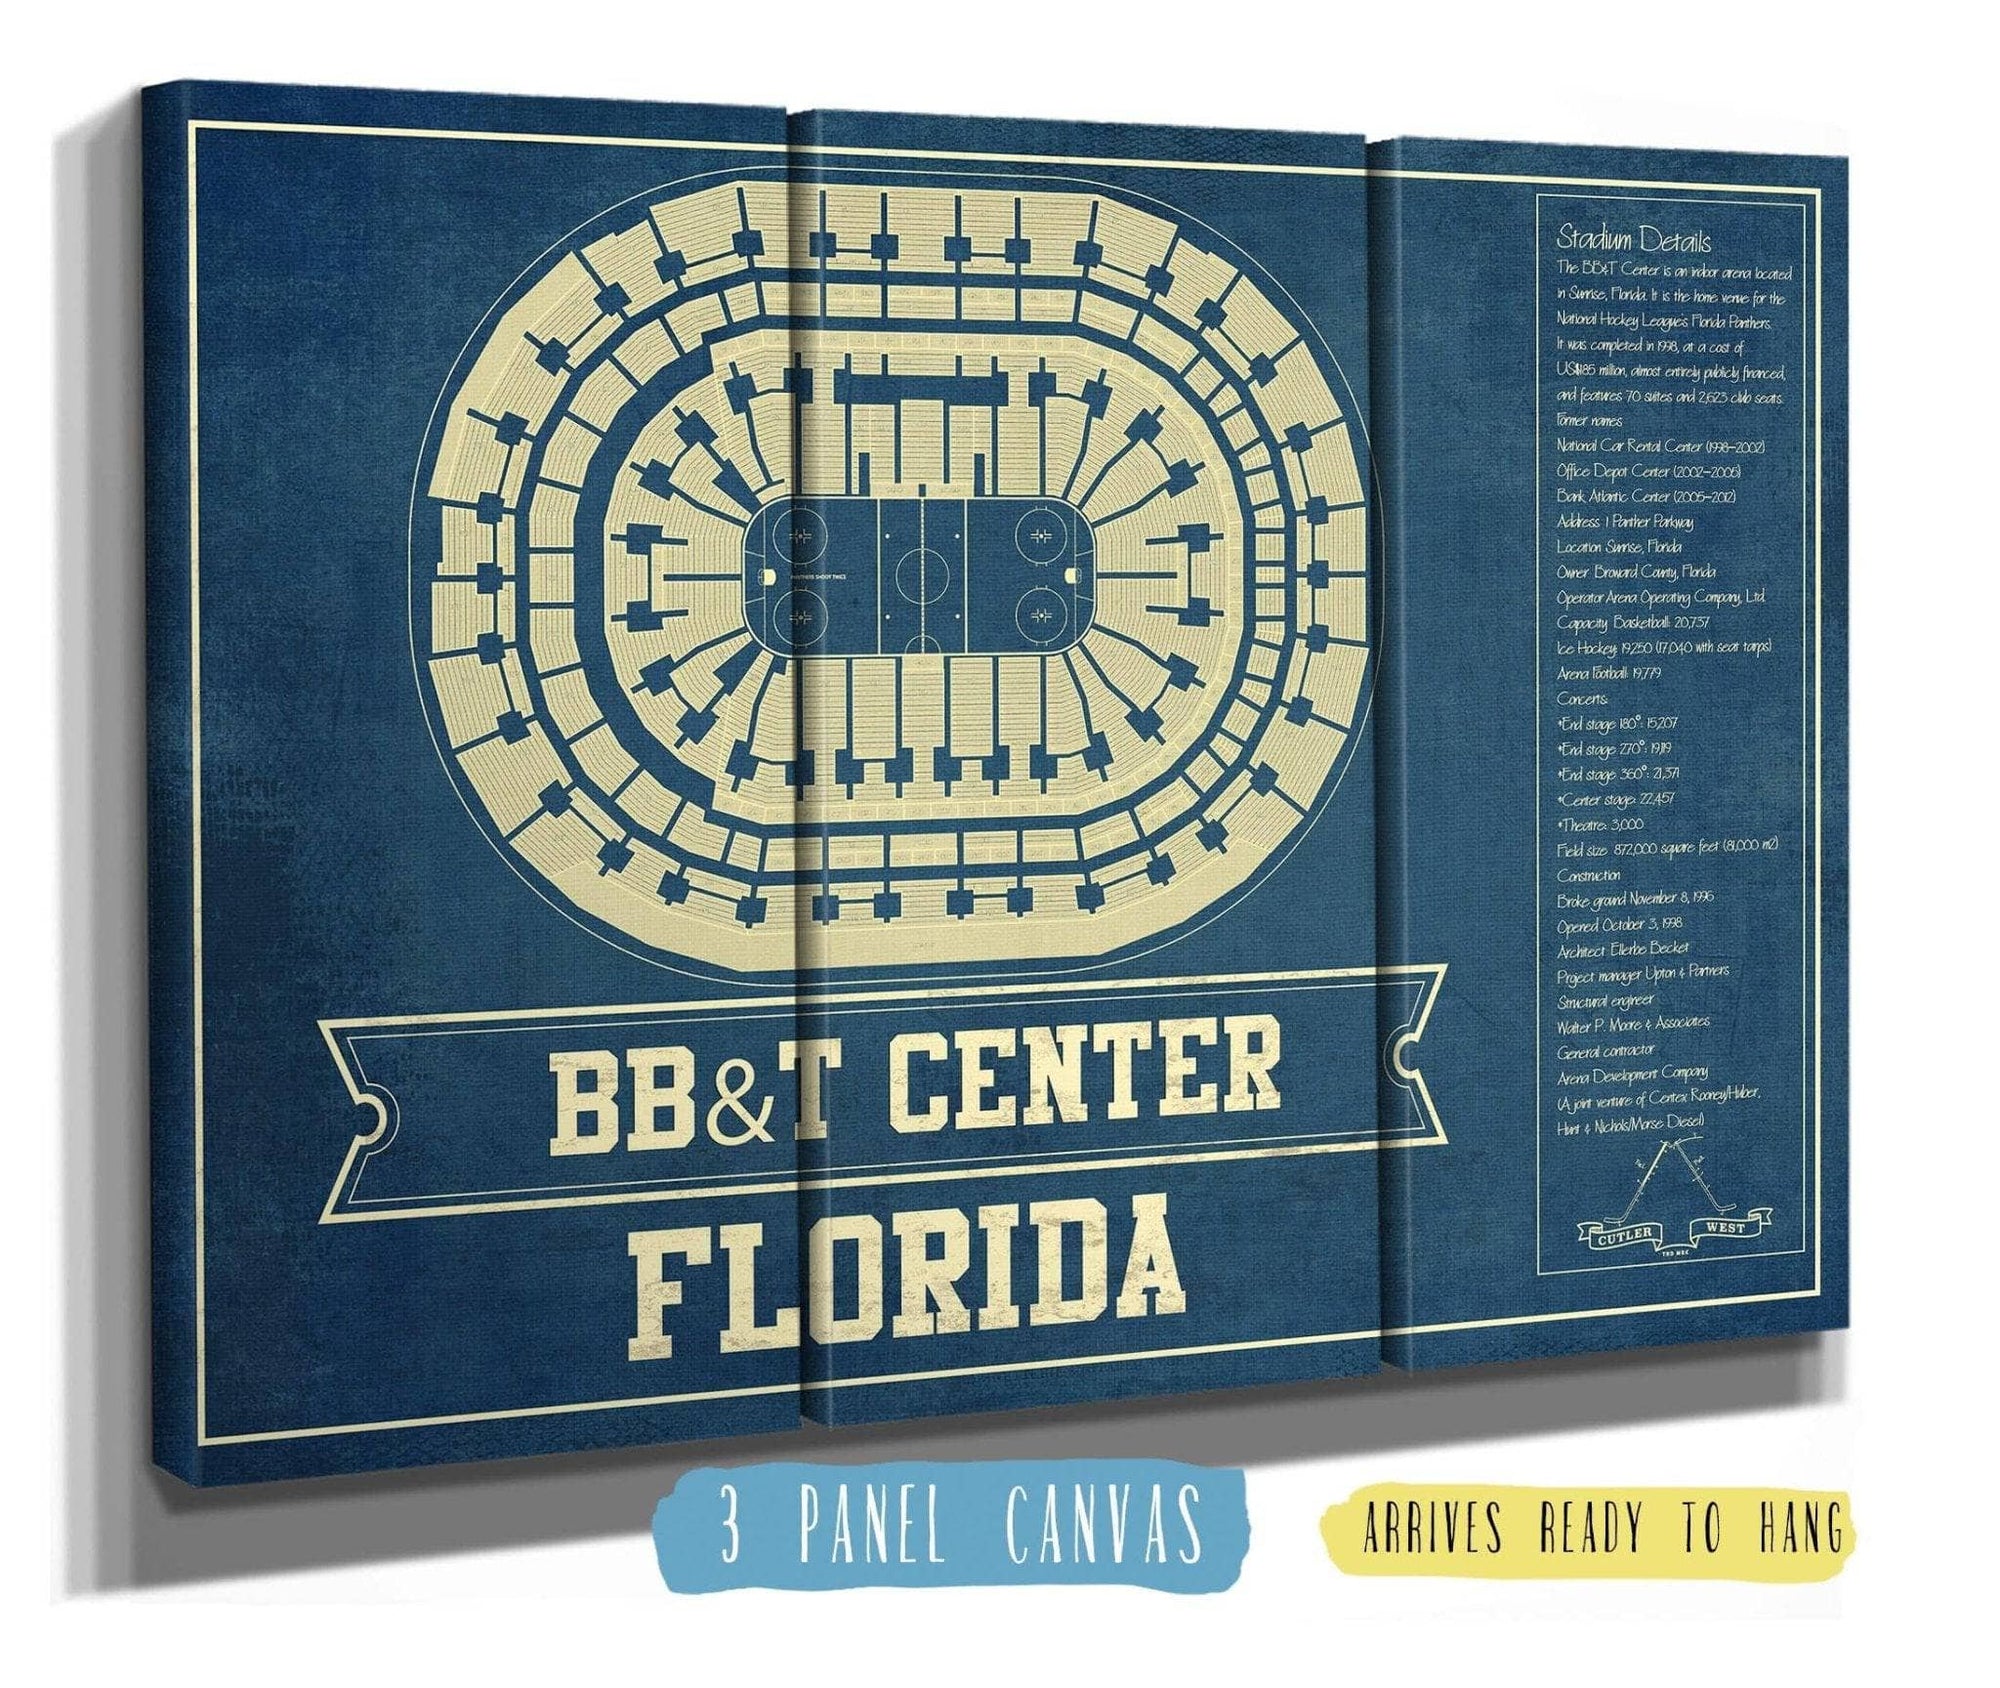 Cutler West 48" x 32" / 3 Panel Canvas Wrap Florida Panthers BB&T Center Seating Chart - Vintage Hockey Print 659981334_79781